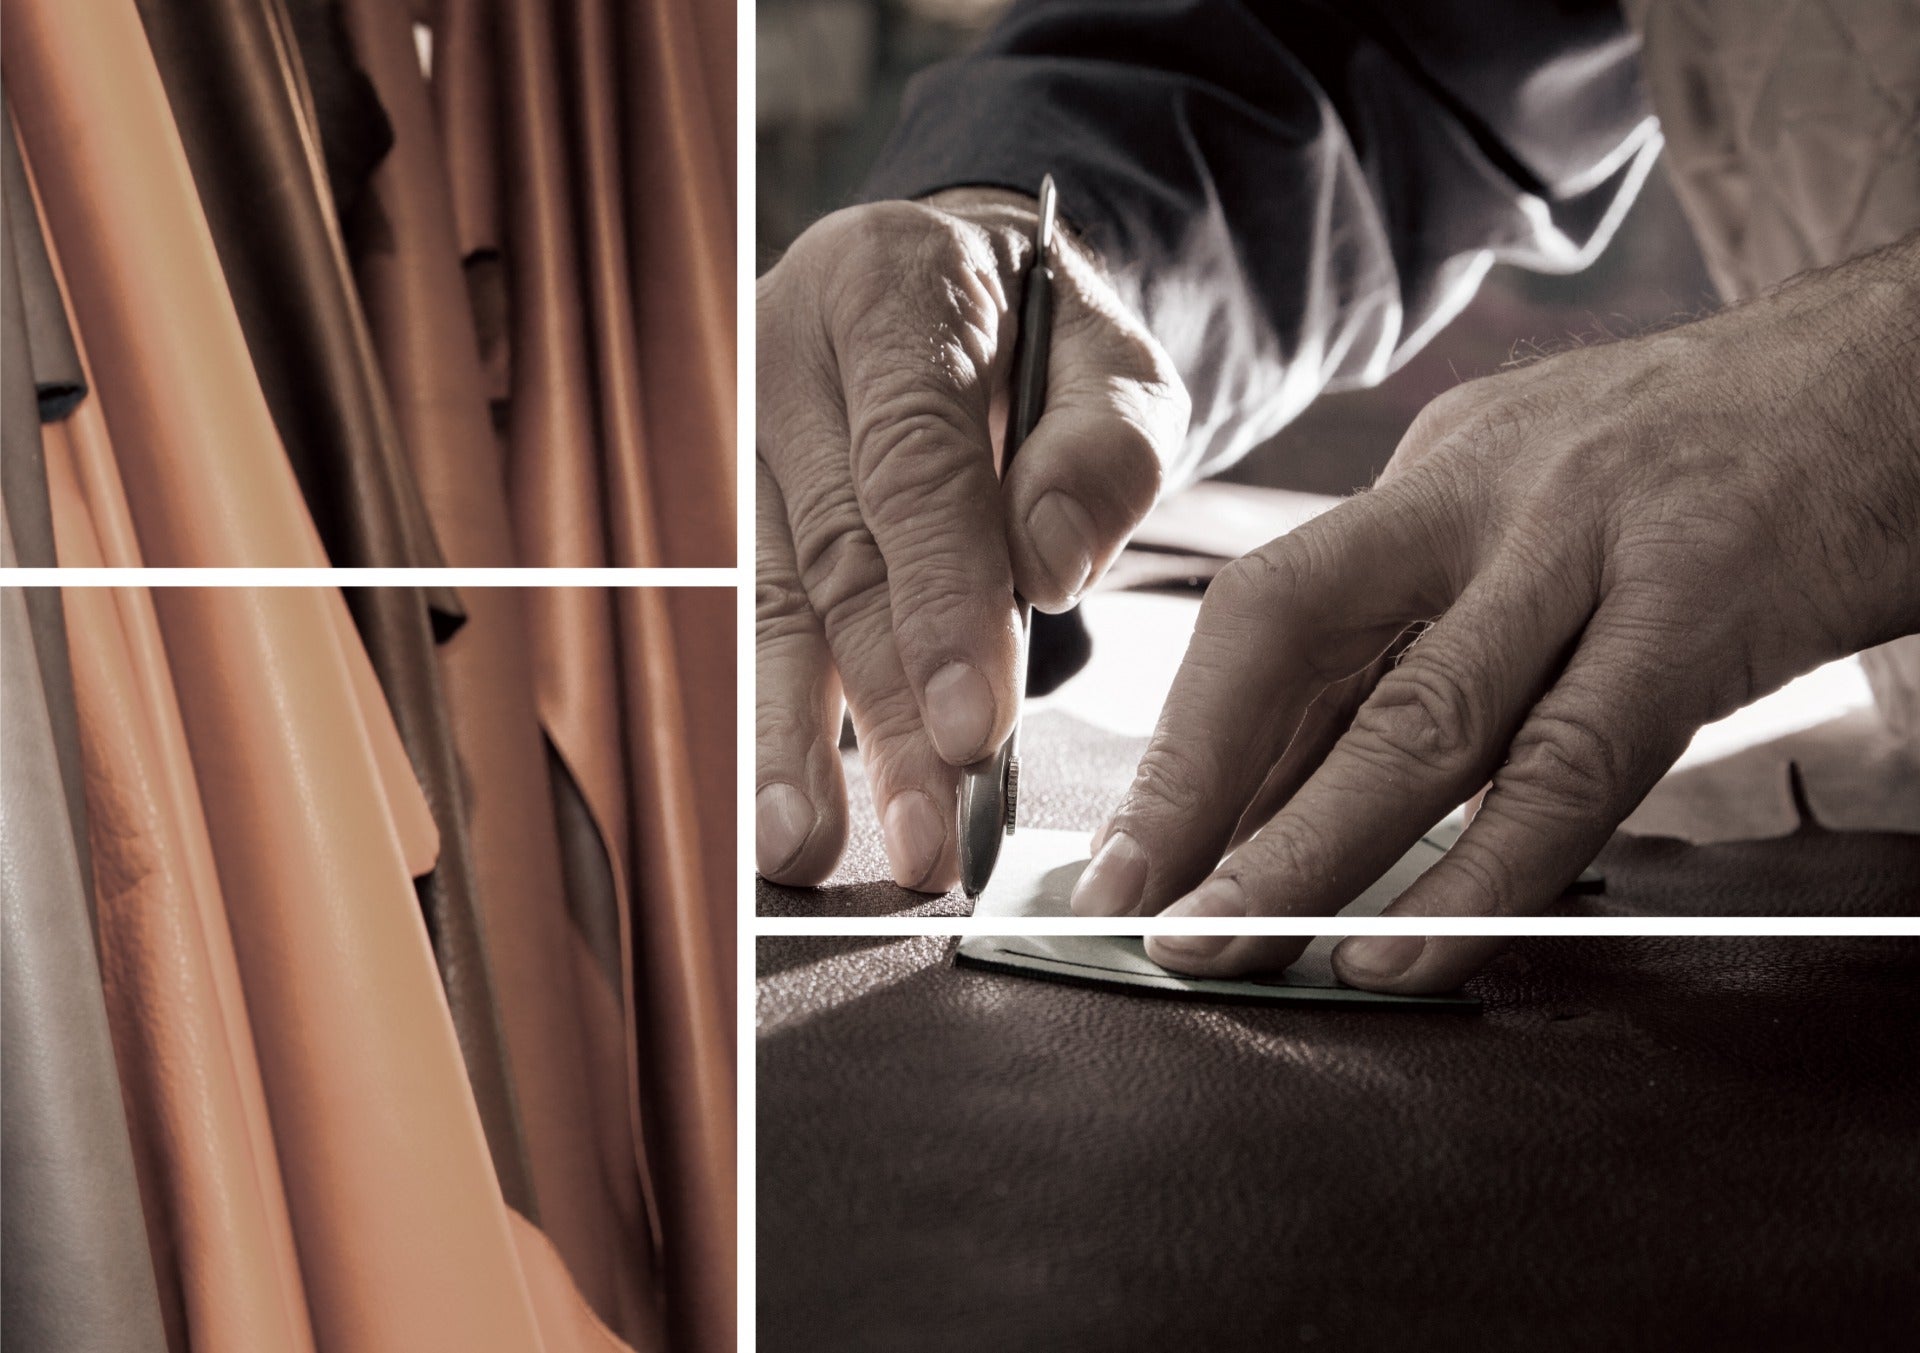 Handcrafted leather products from BONAVENTURA demonstrating quality and sustainability.